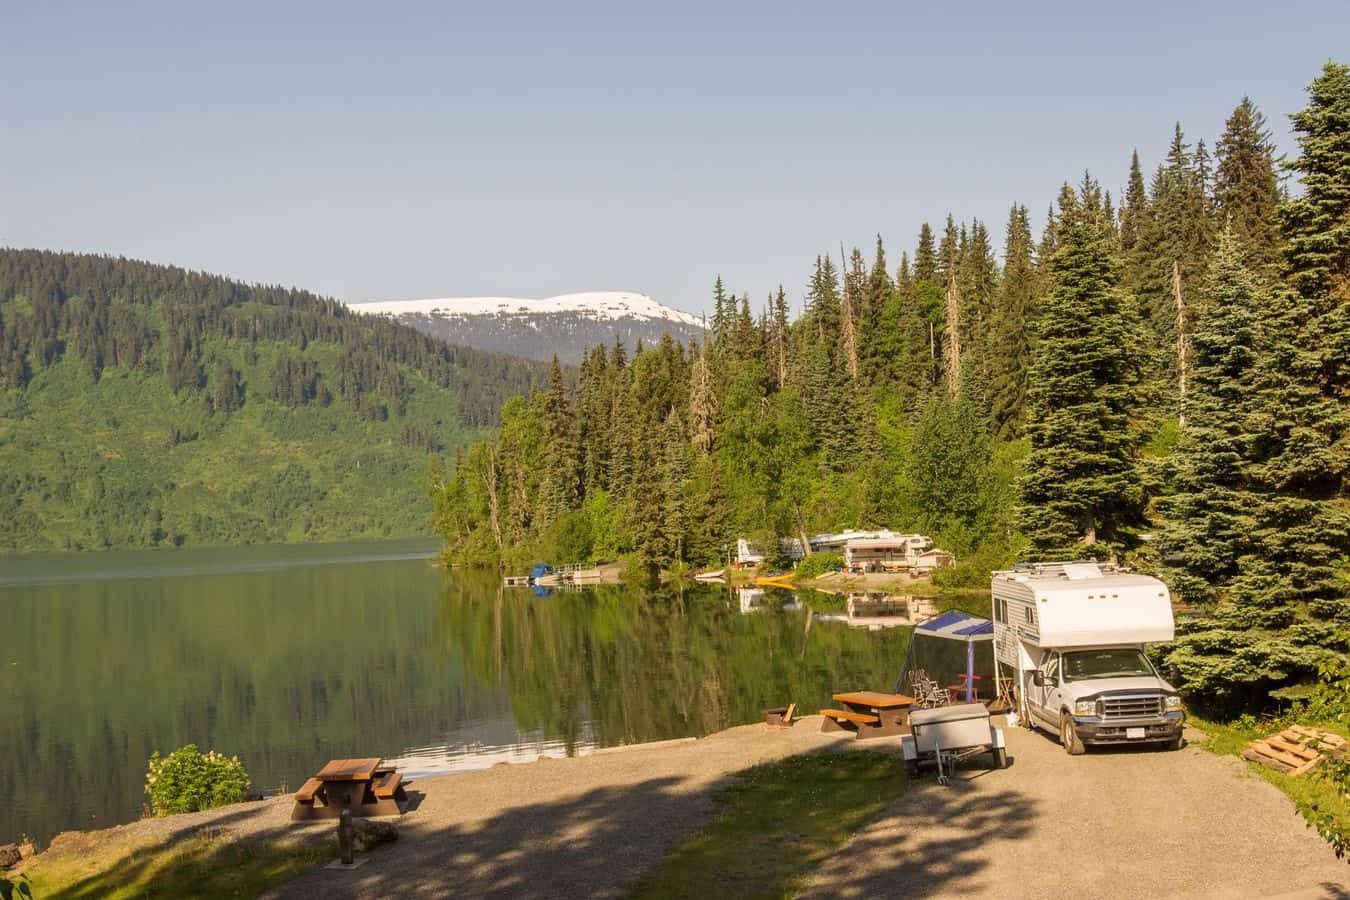 17 RV Camp Spots in Washington (Both parks and rustic